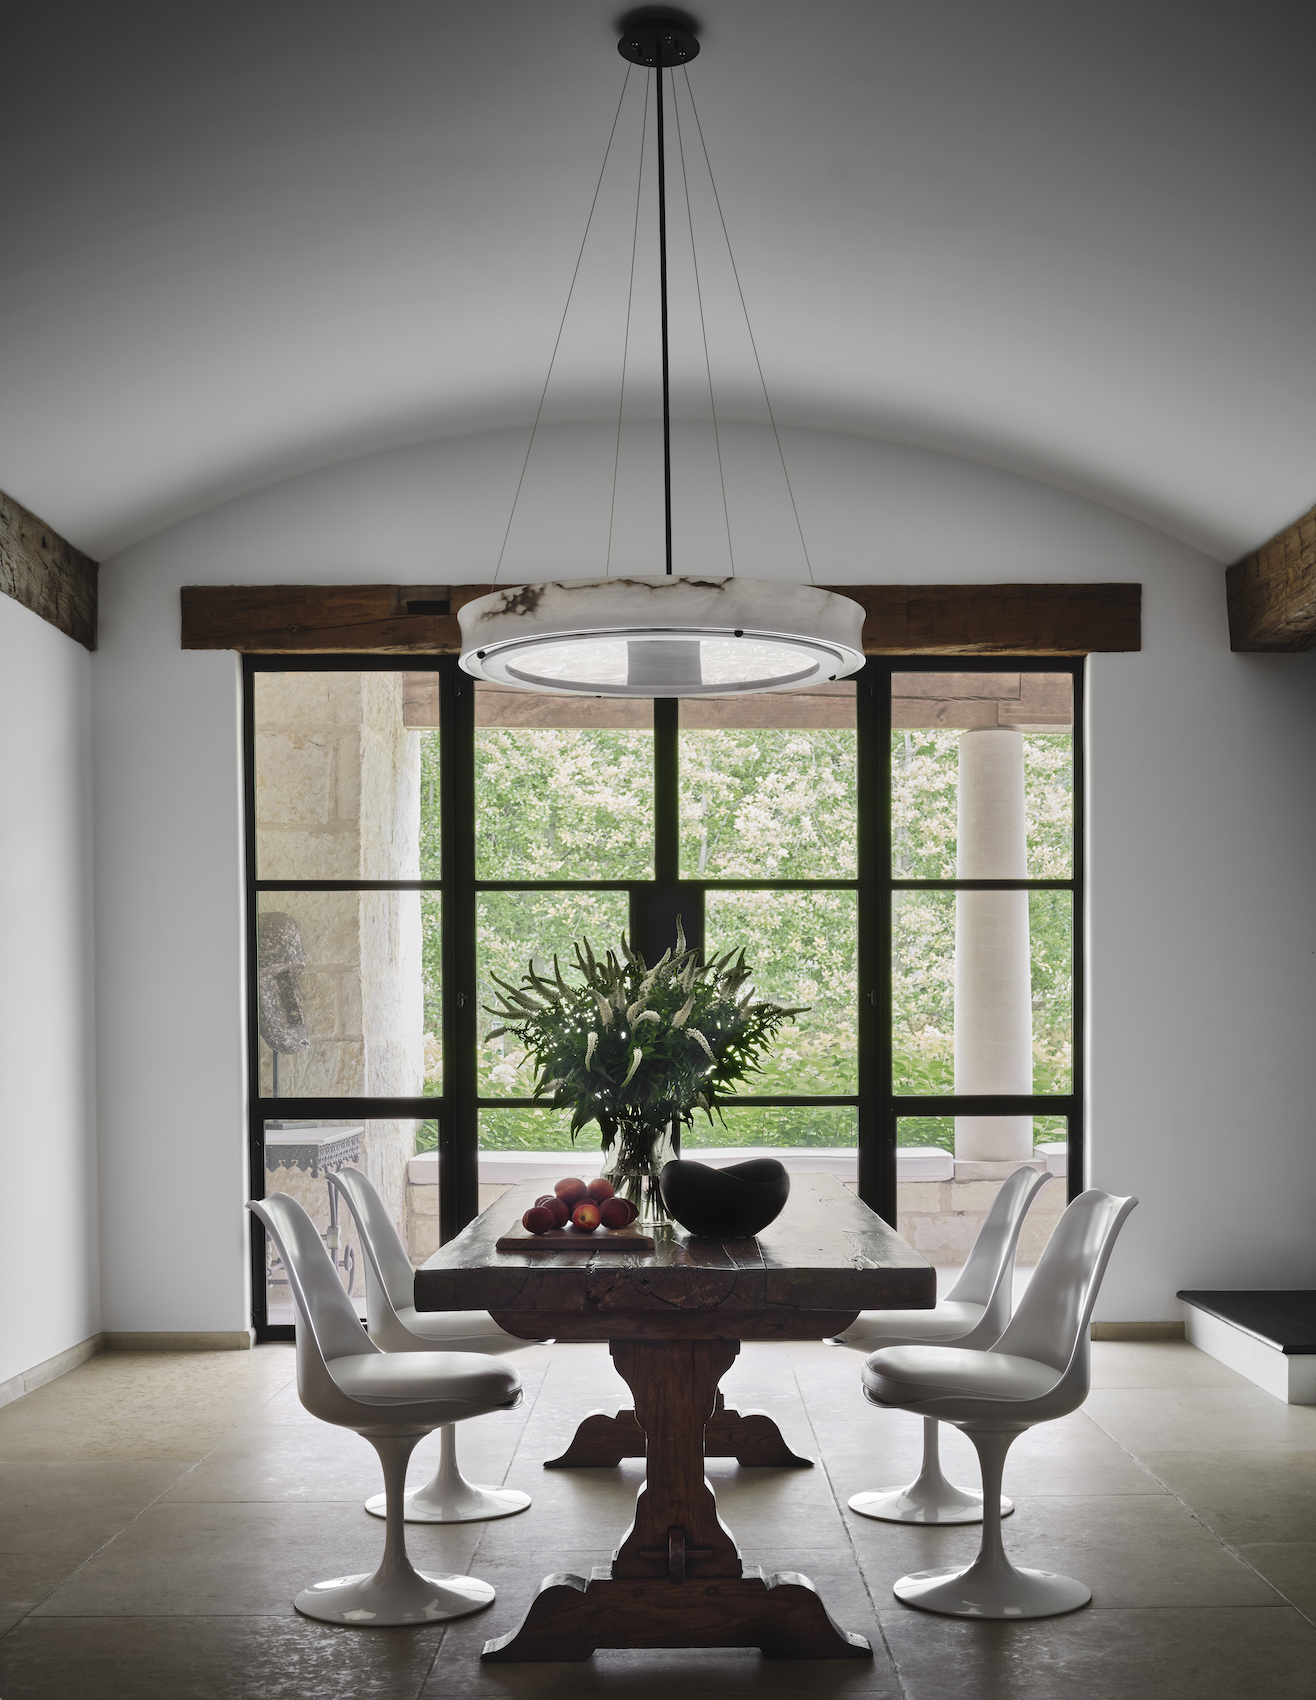 Dining area of a house interior designed by Chad Dorsey in Effect Magazine